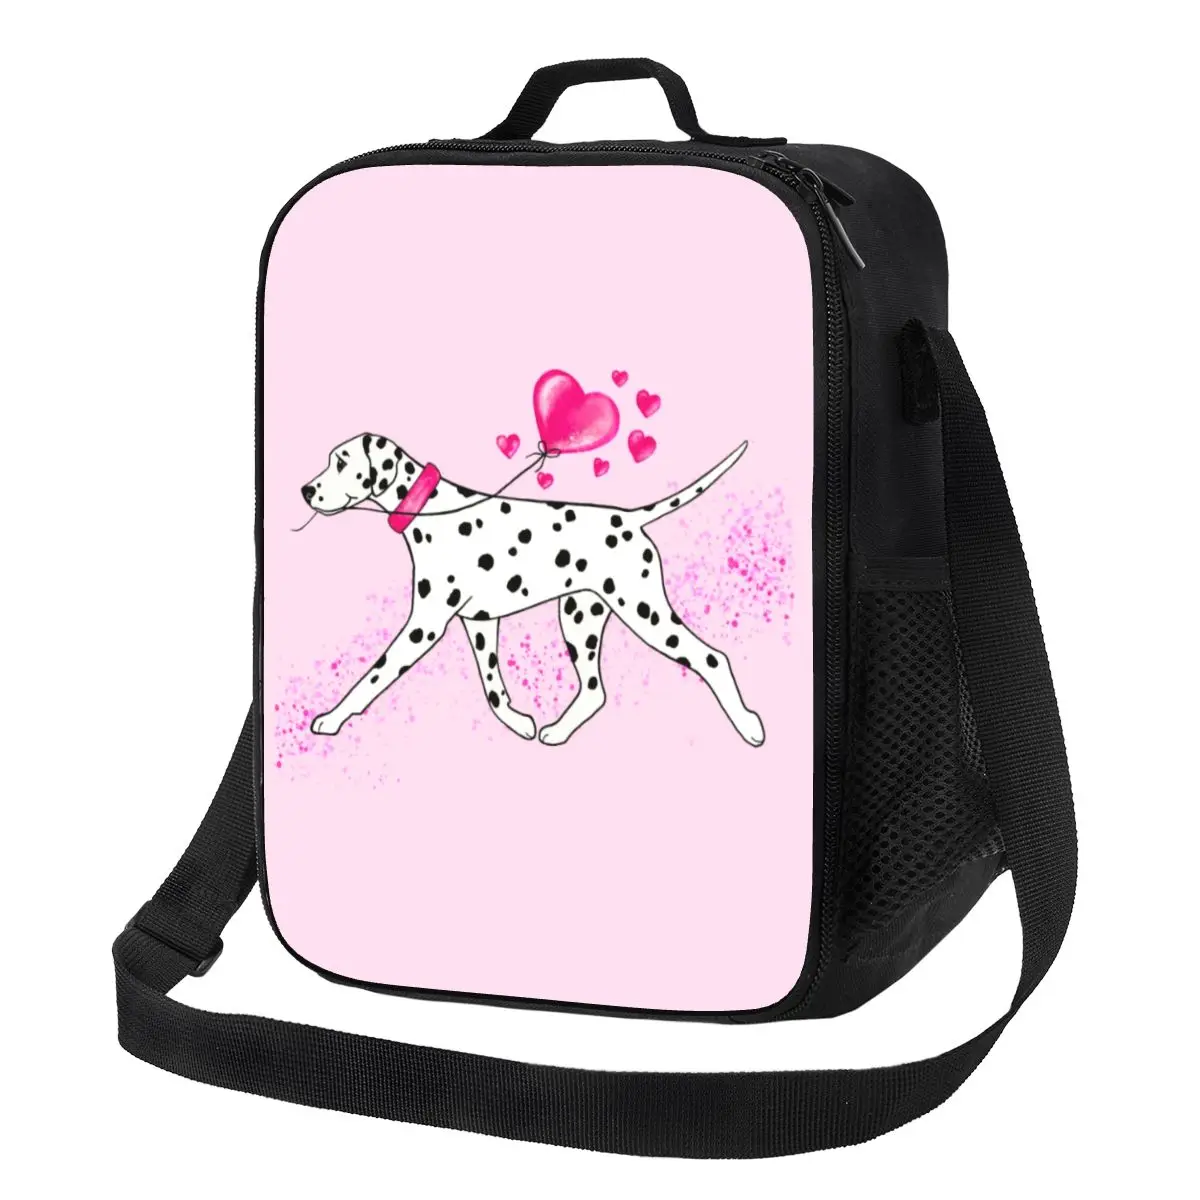 

Dalmatian Hearts Insulated Lunch Tote Bag for Leopard Carriage Firehouse Plum Pudding Dog Resuable Thermal Bento Box Work Travel